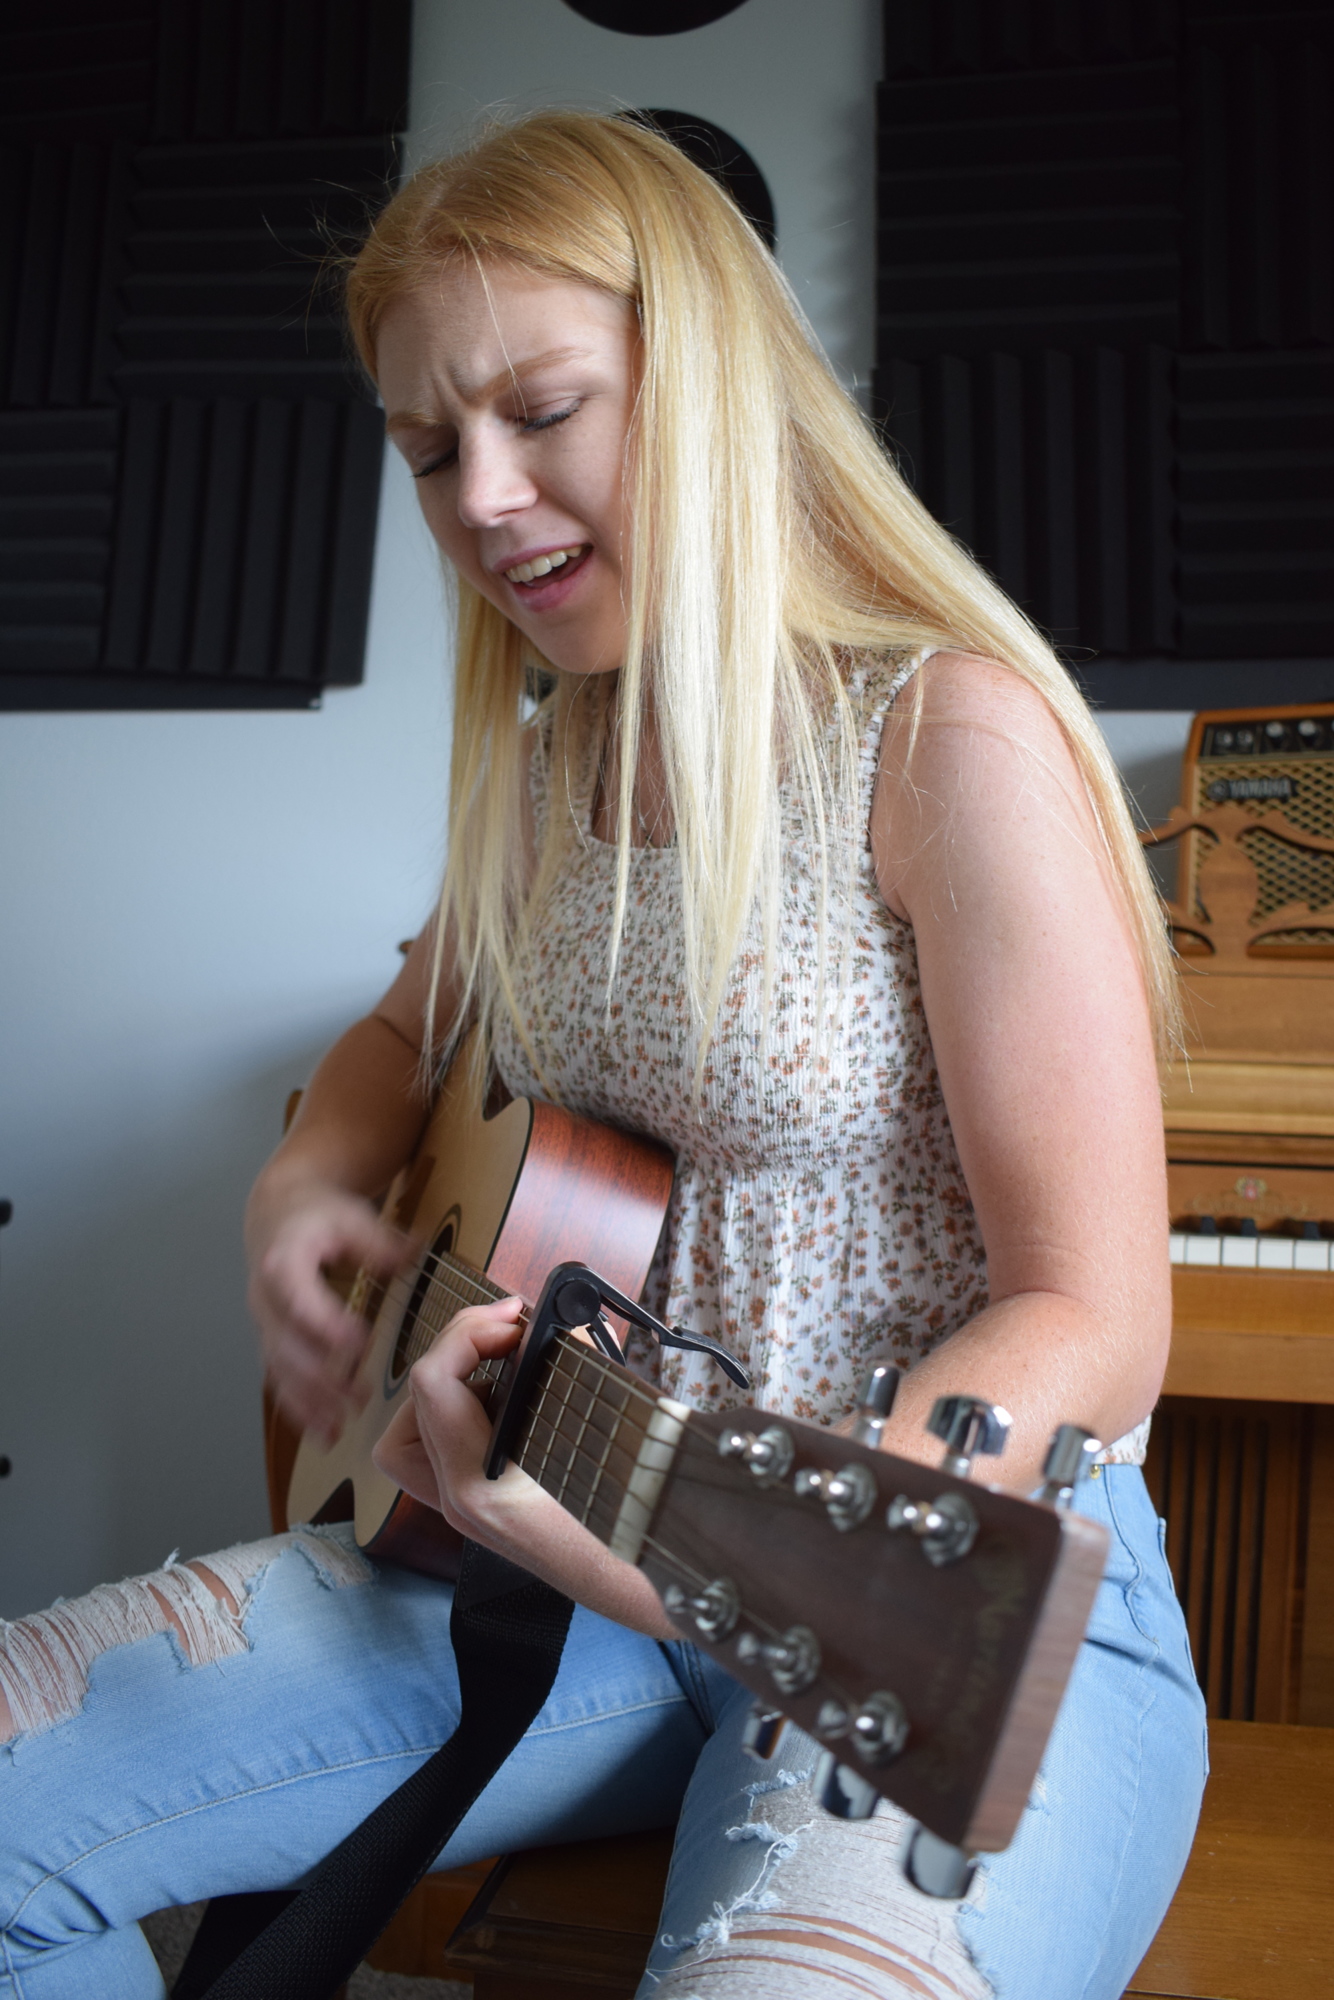 Kaitlyn Hornung says she has written almost 200 songs.